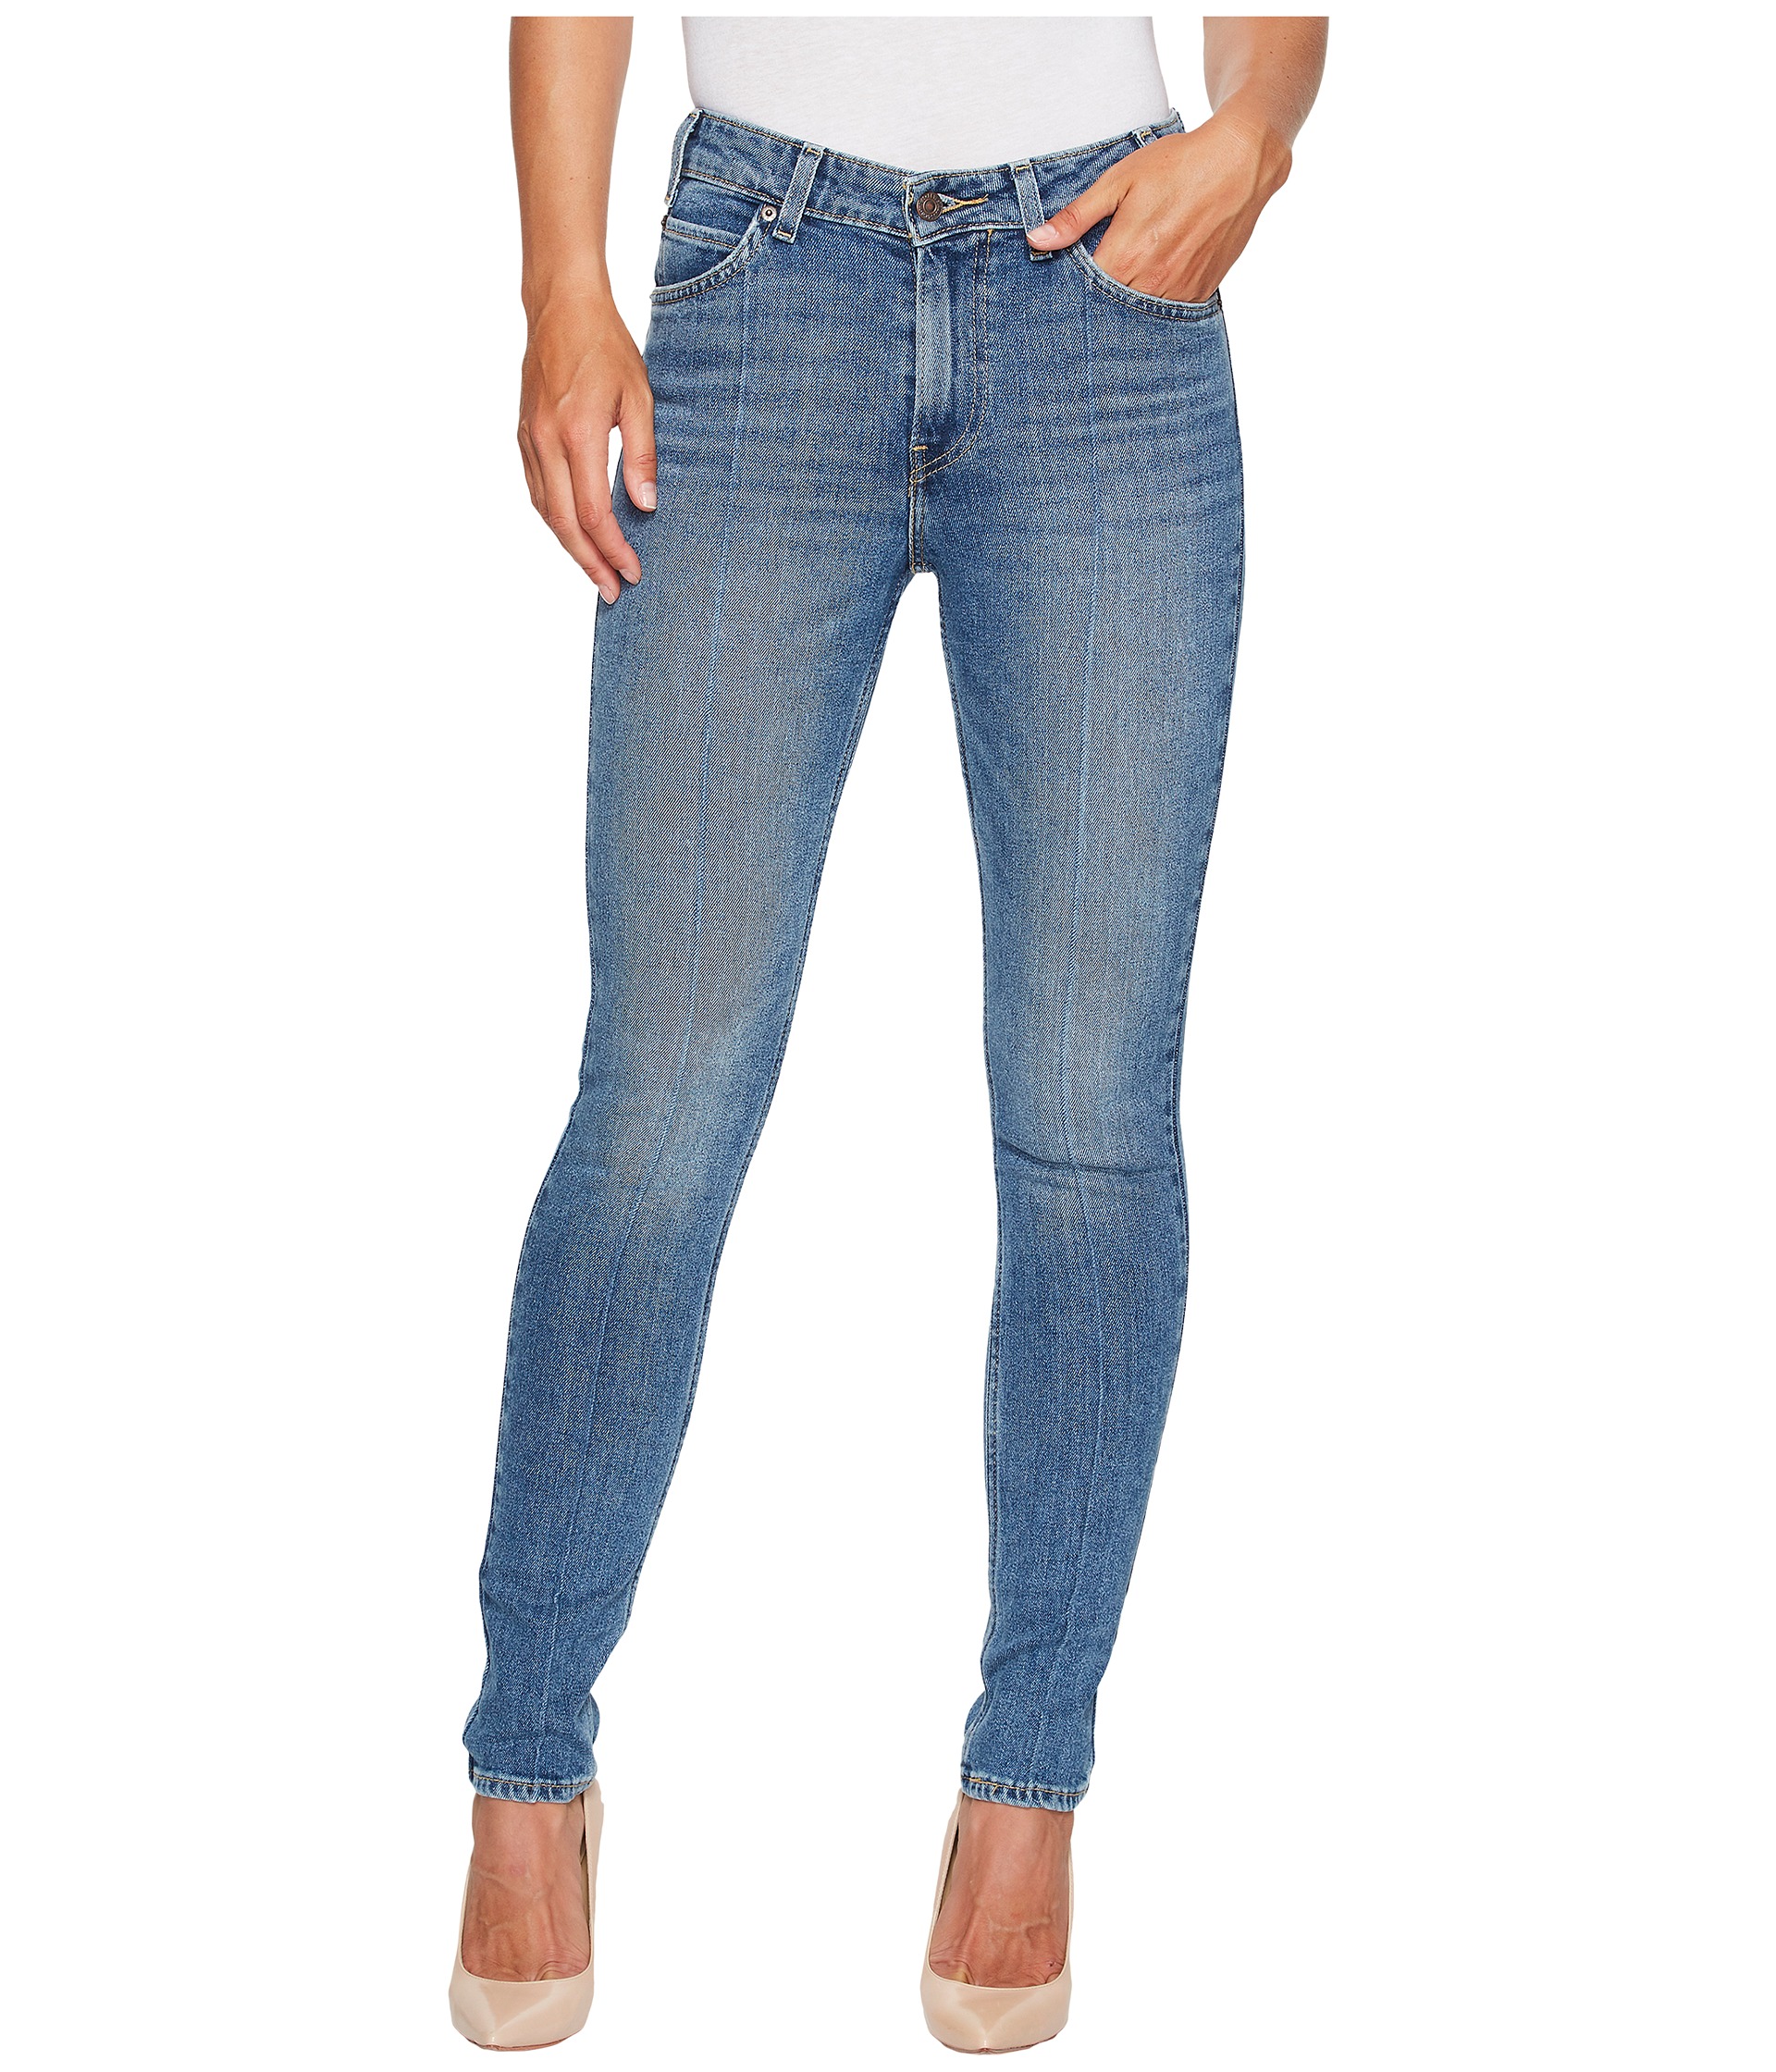 Levi's® Womens 721 Vintage High-Rise Skinny at Zappos.com